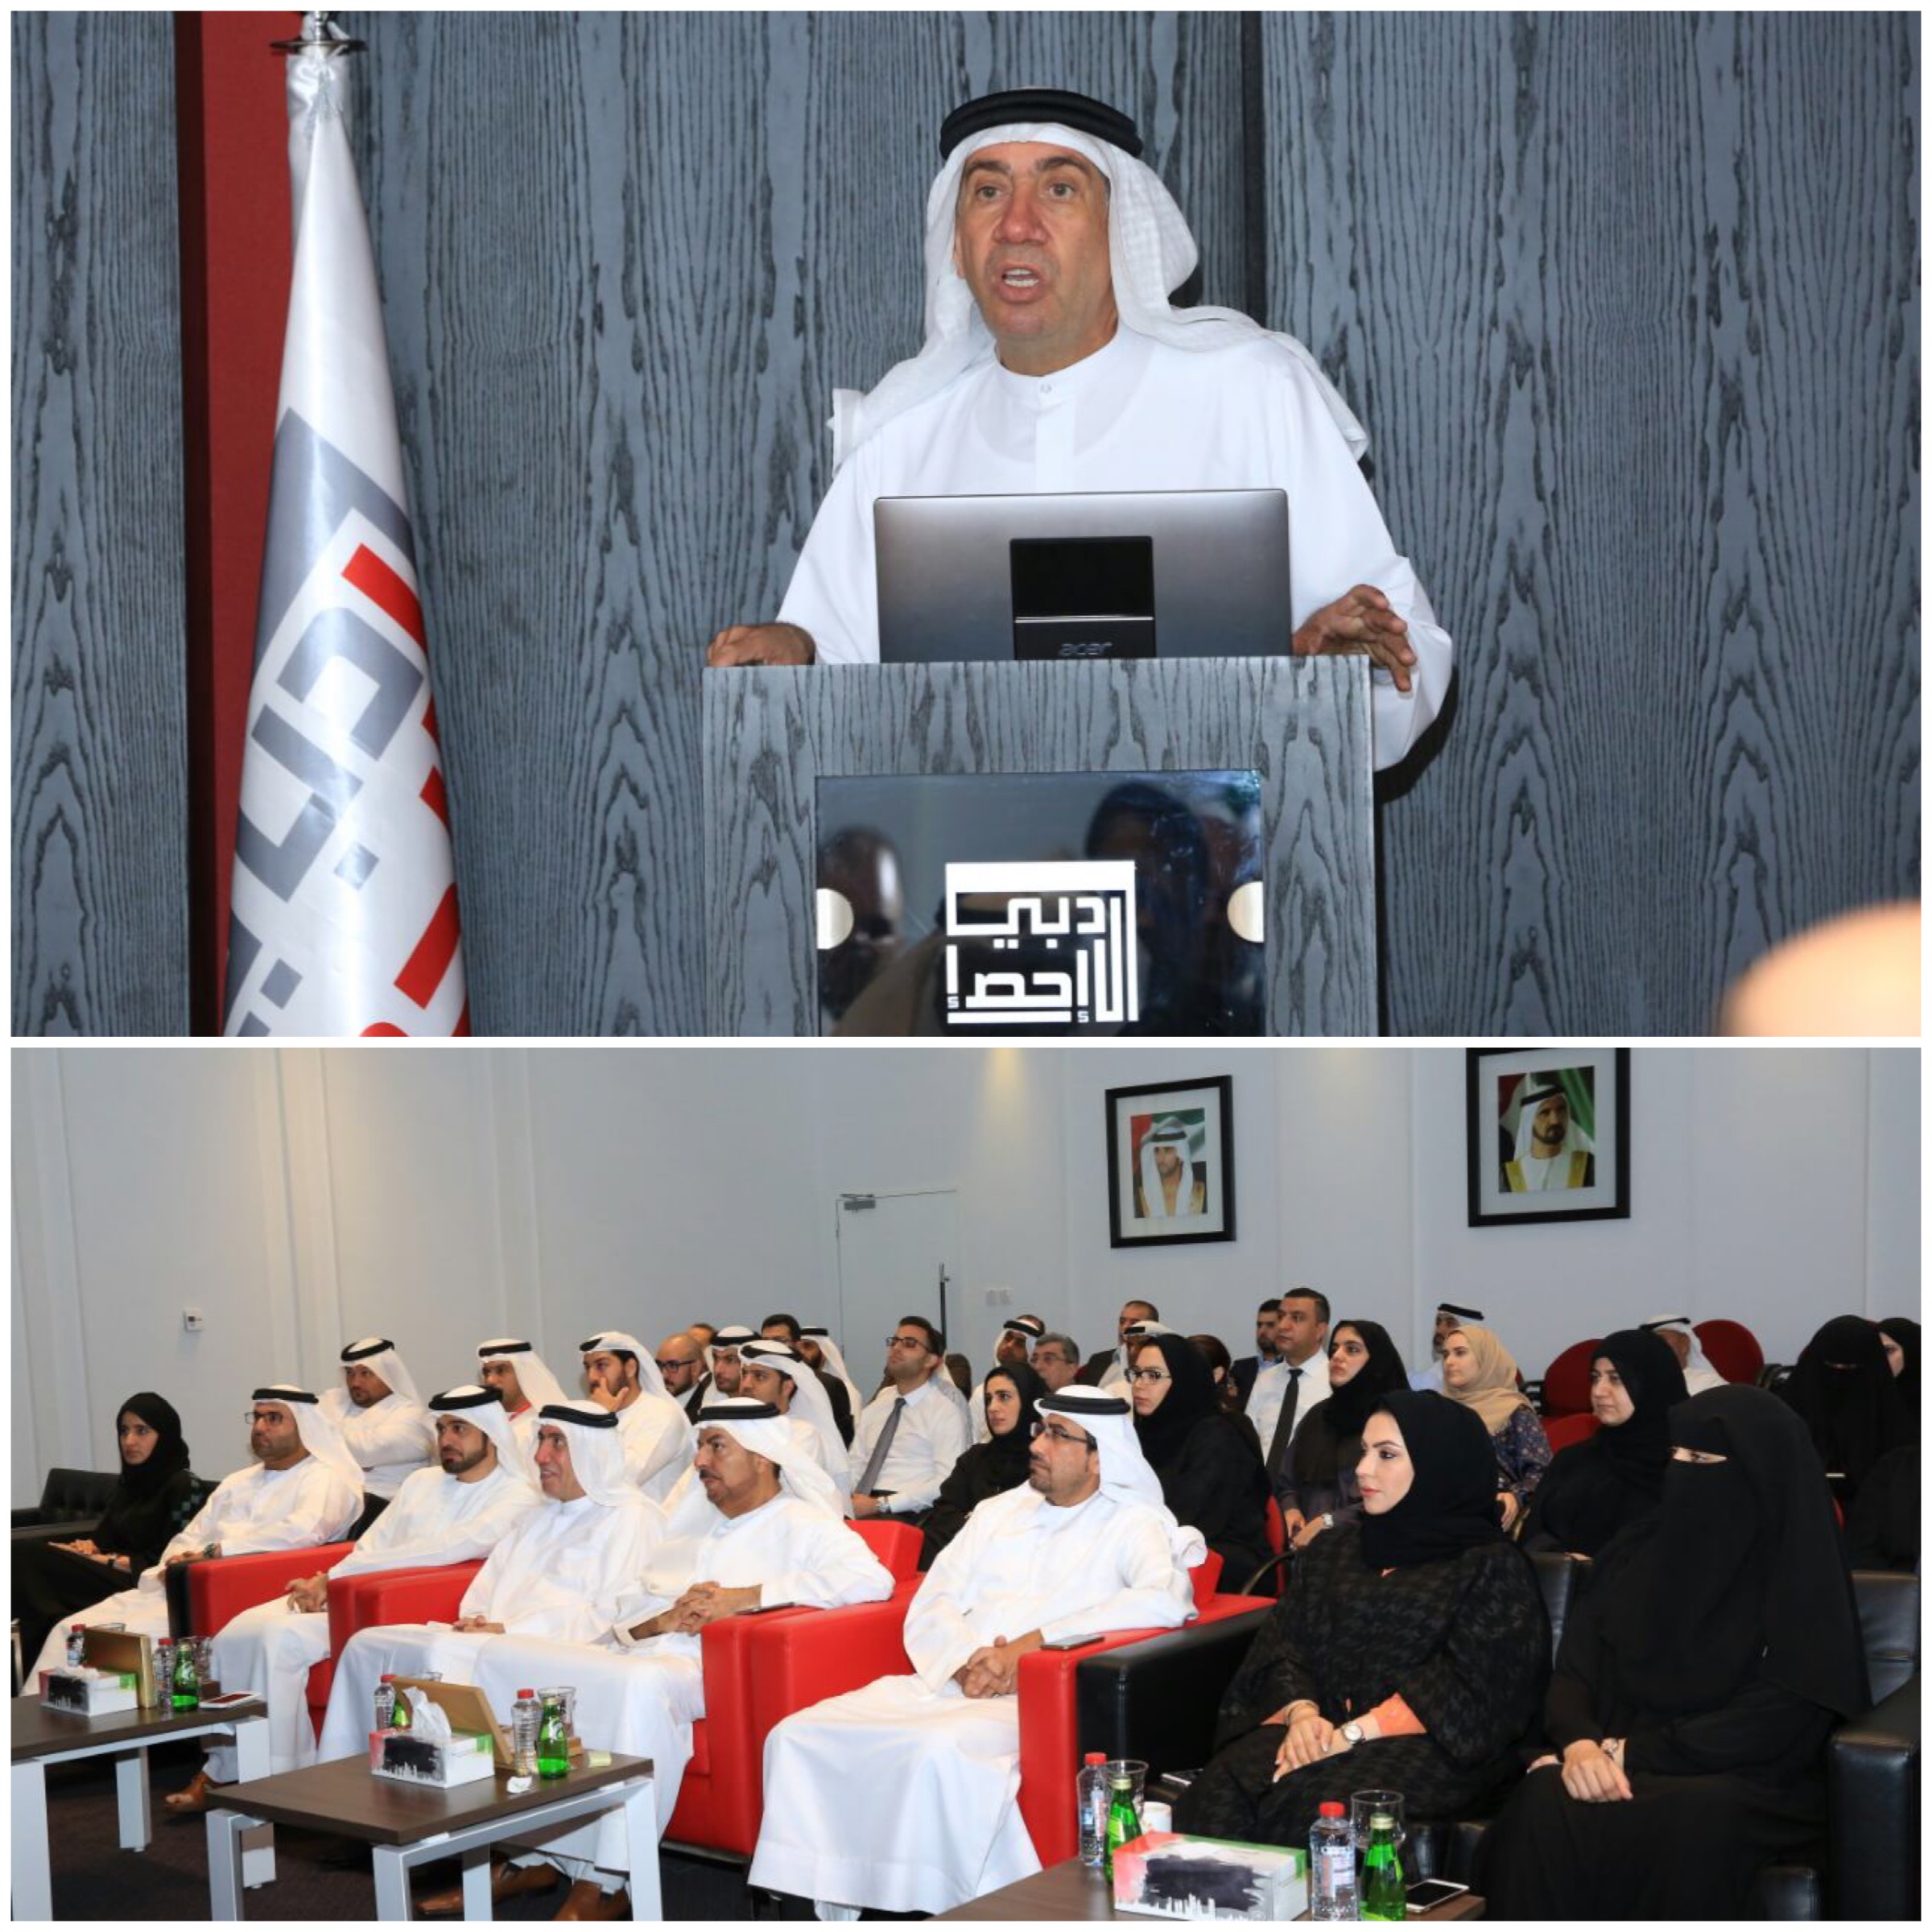 ​Image : Nuseirat and Al Muhairi and Al Janahi and DSC staff during the Fourth Generation Forum